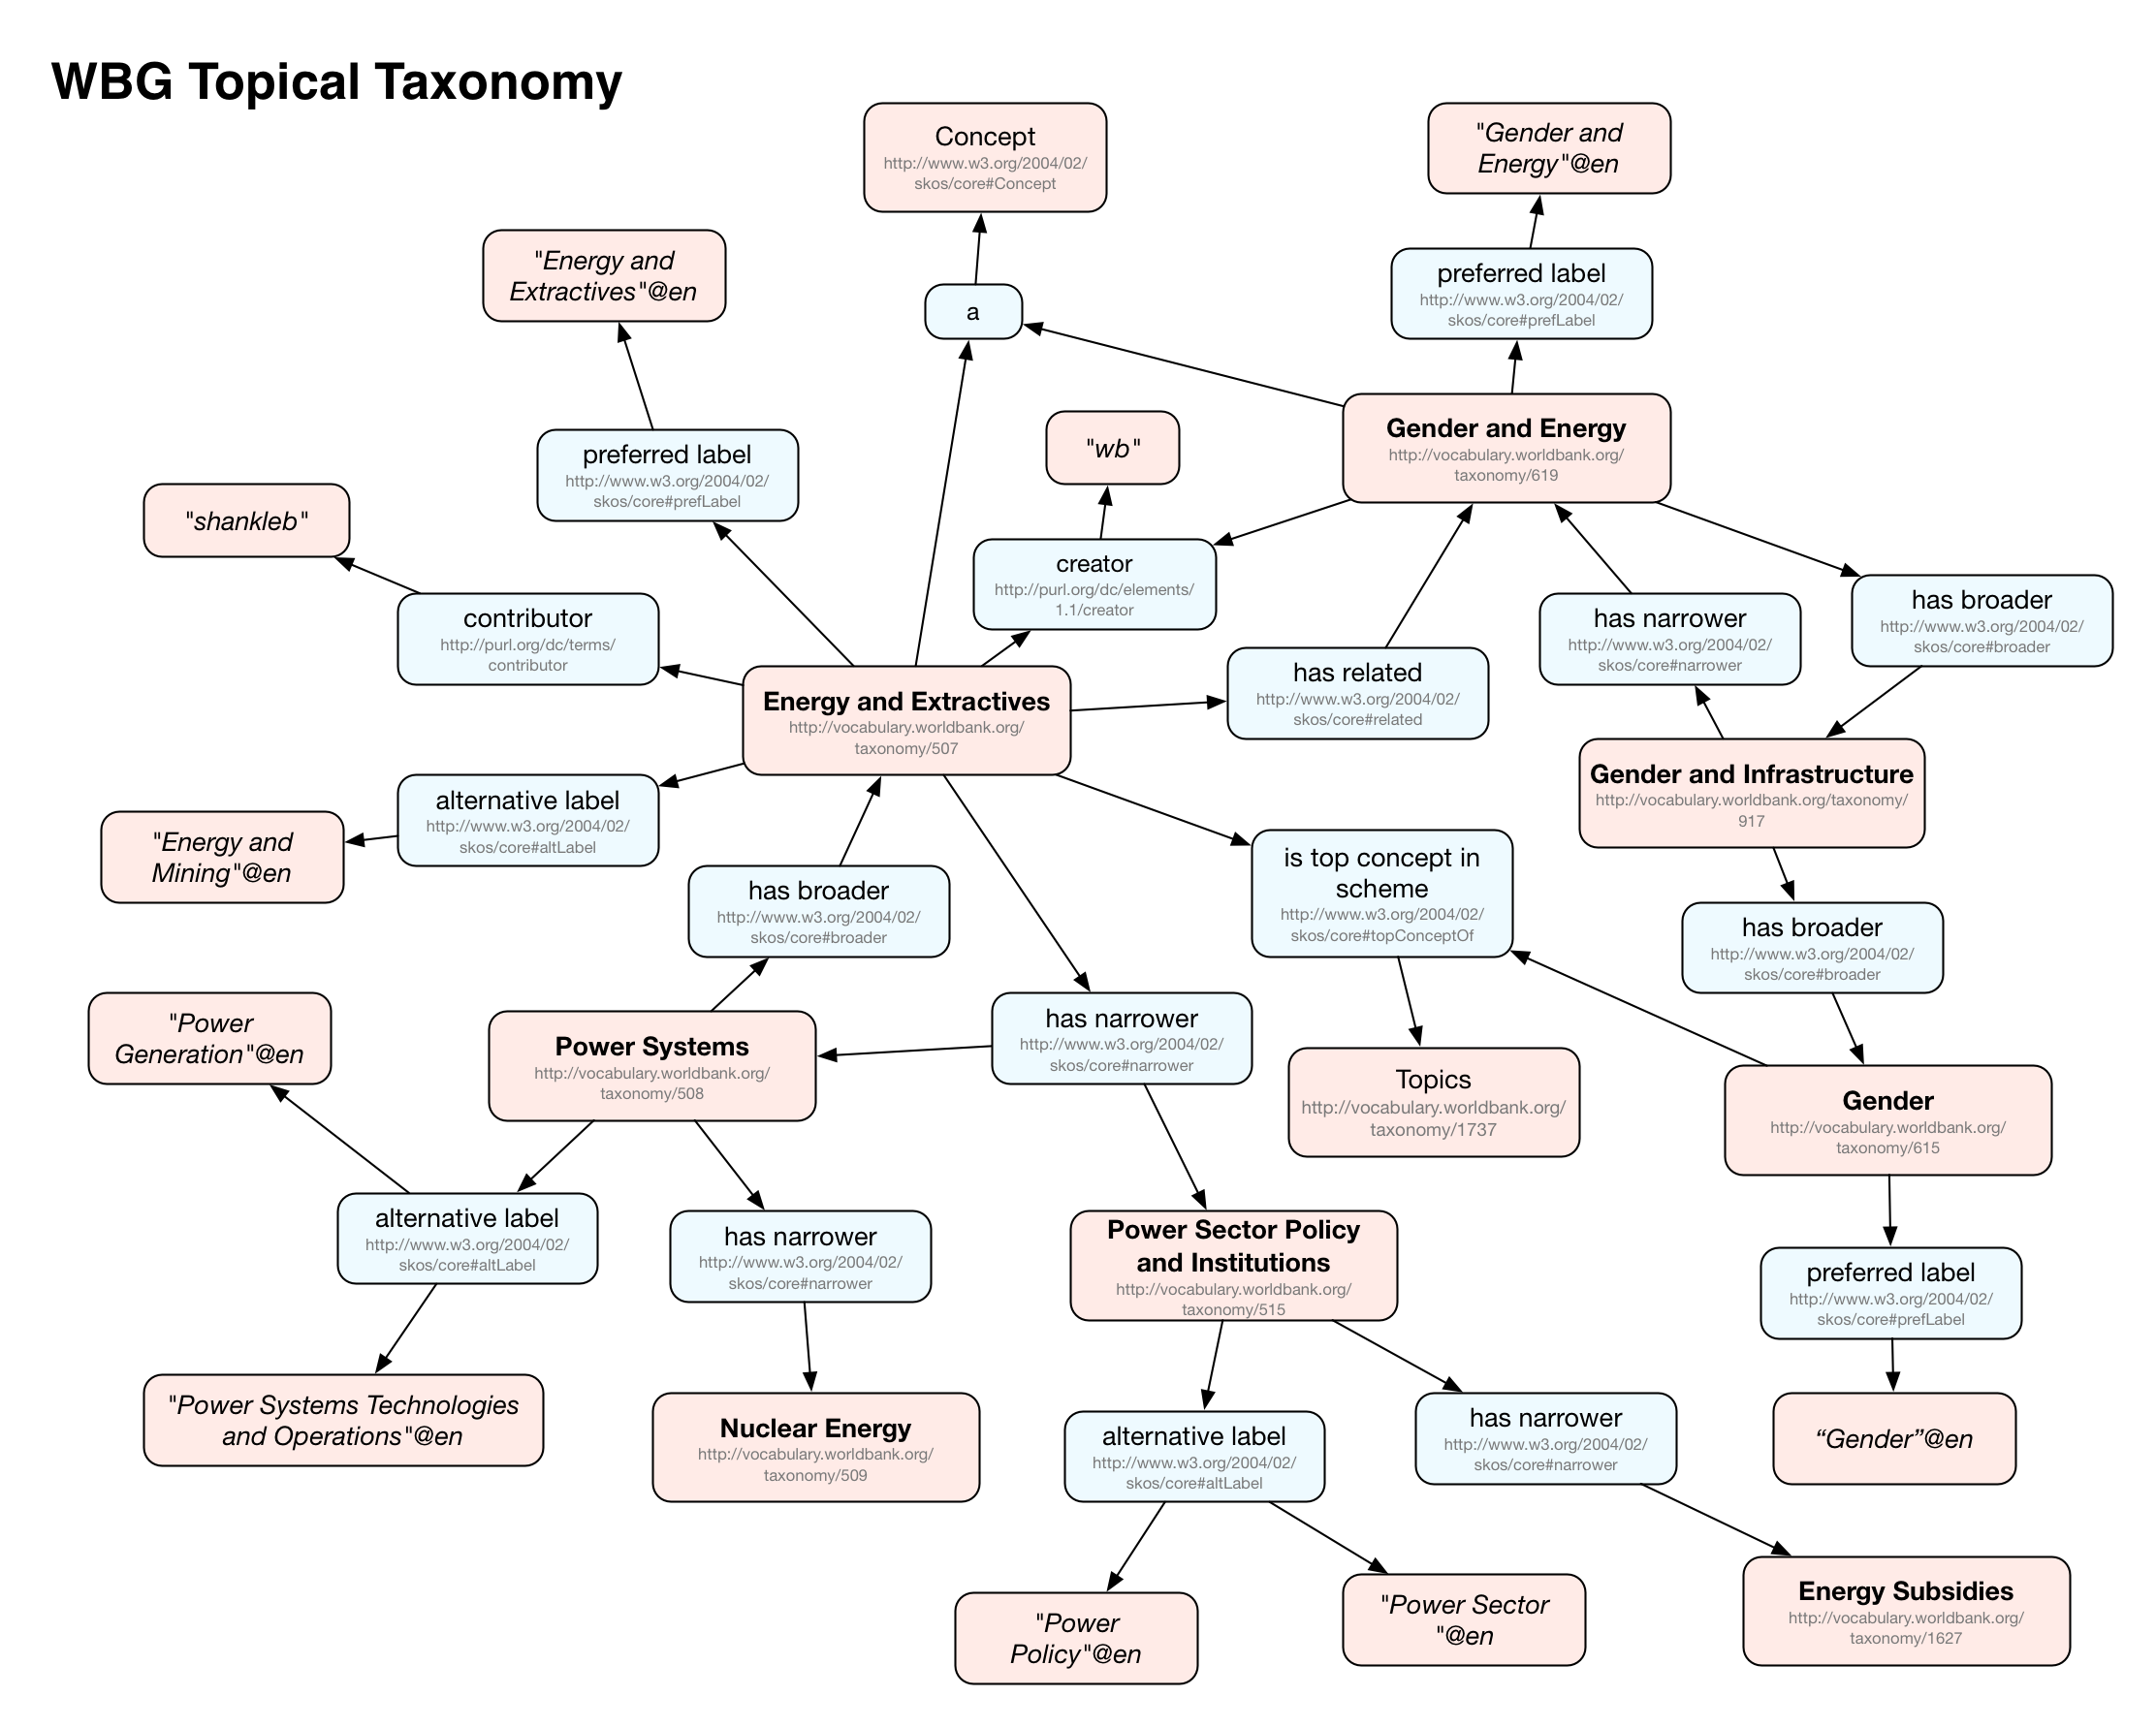 a snapshot of what The World Bank taxonomy looks like